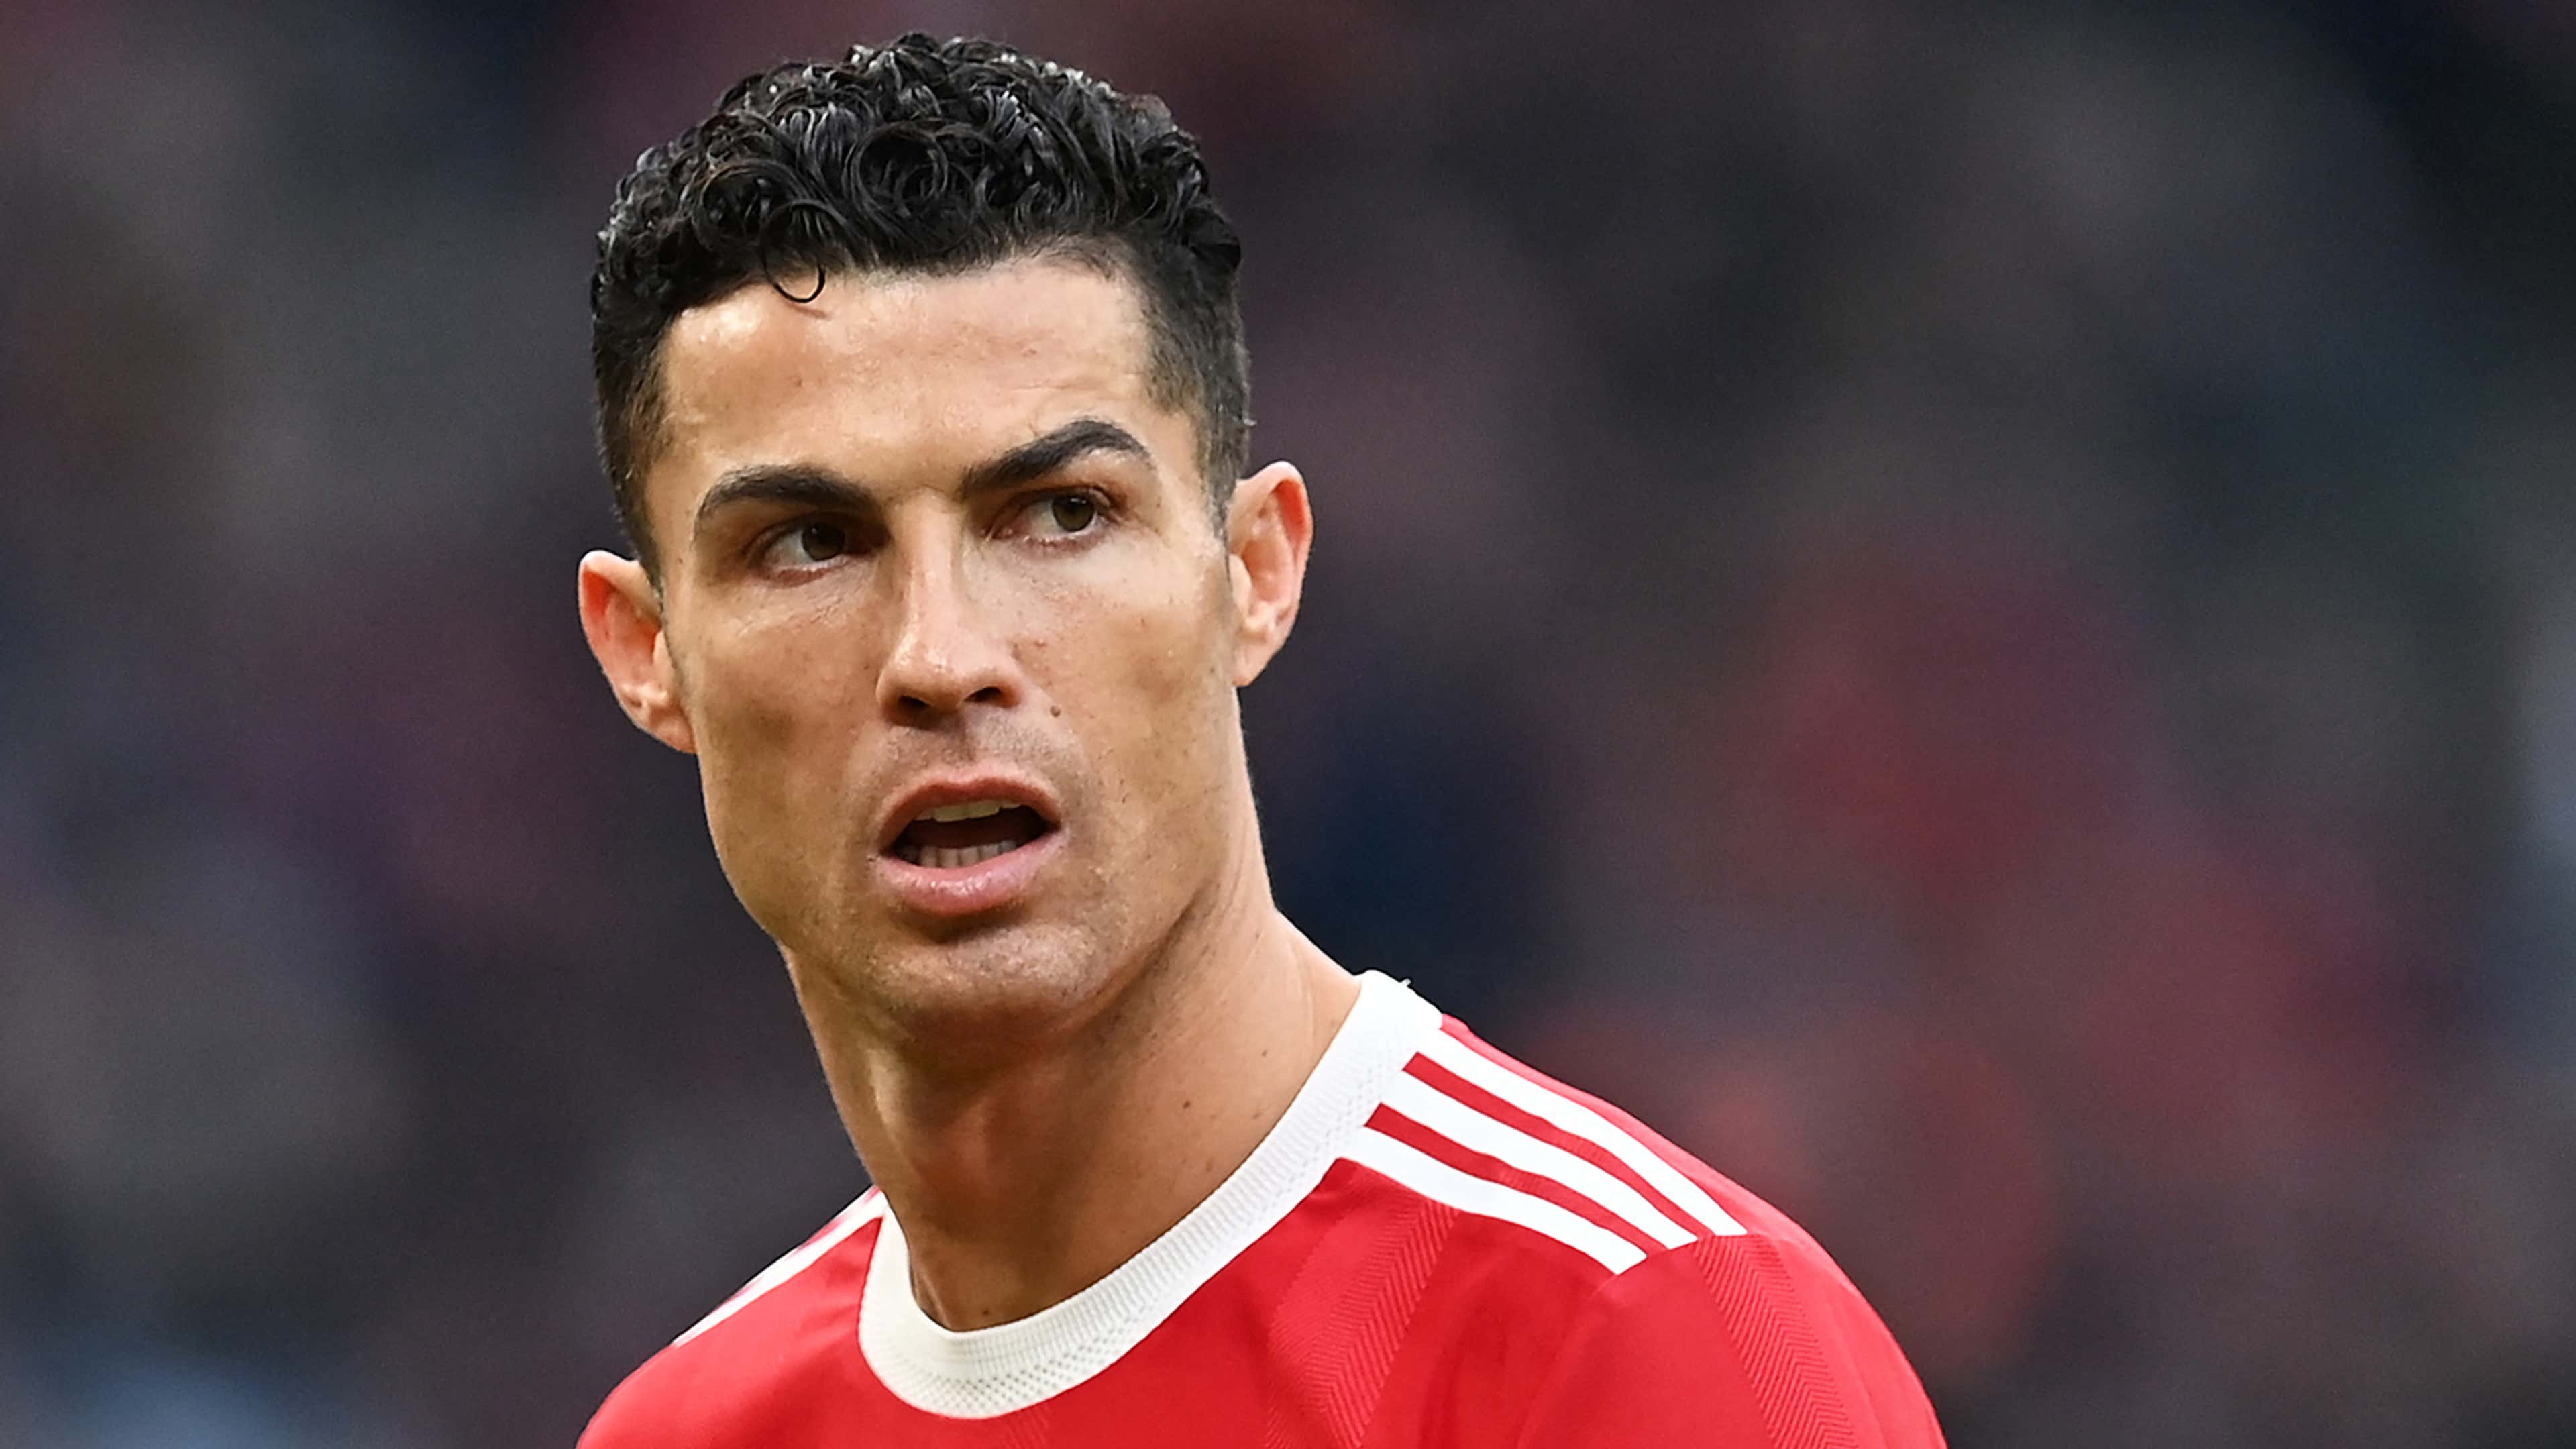 At 37, here's how Cristiano Ronaldo is fitter than players half his age